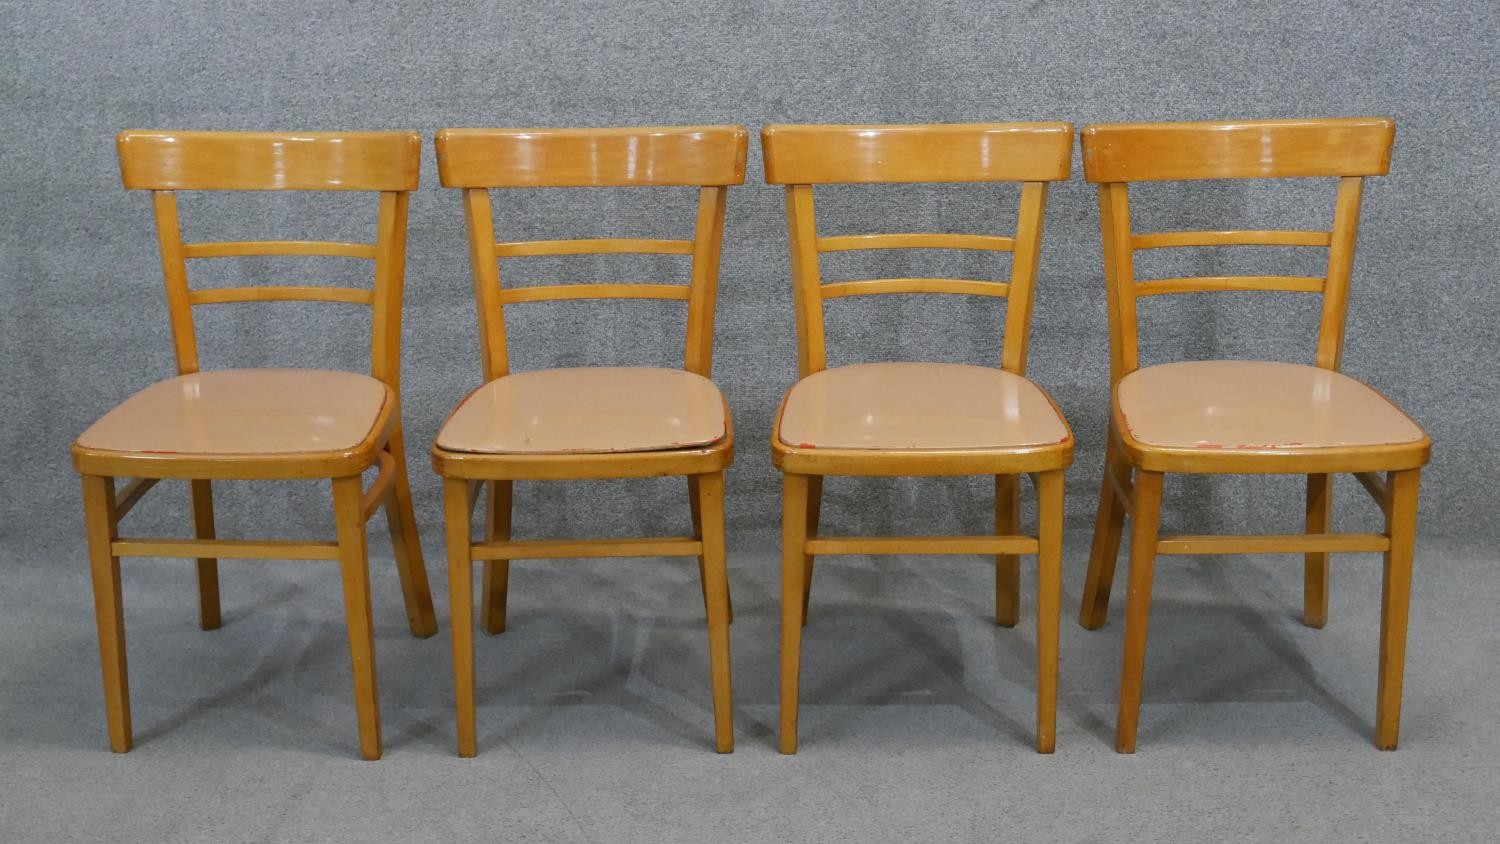 A set of four vintage beech kitchen chairs.